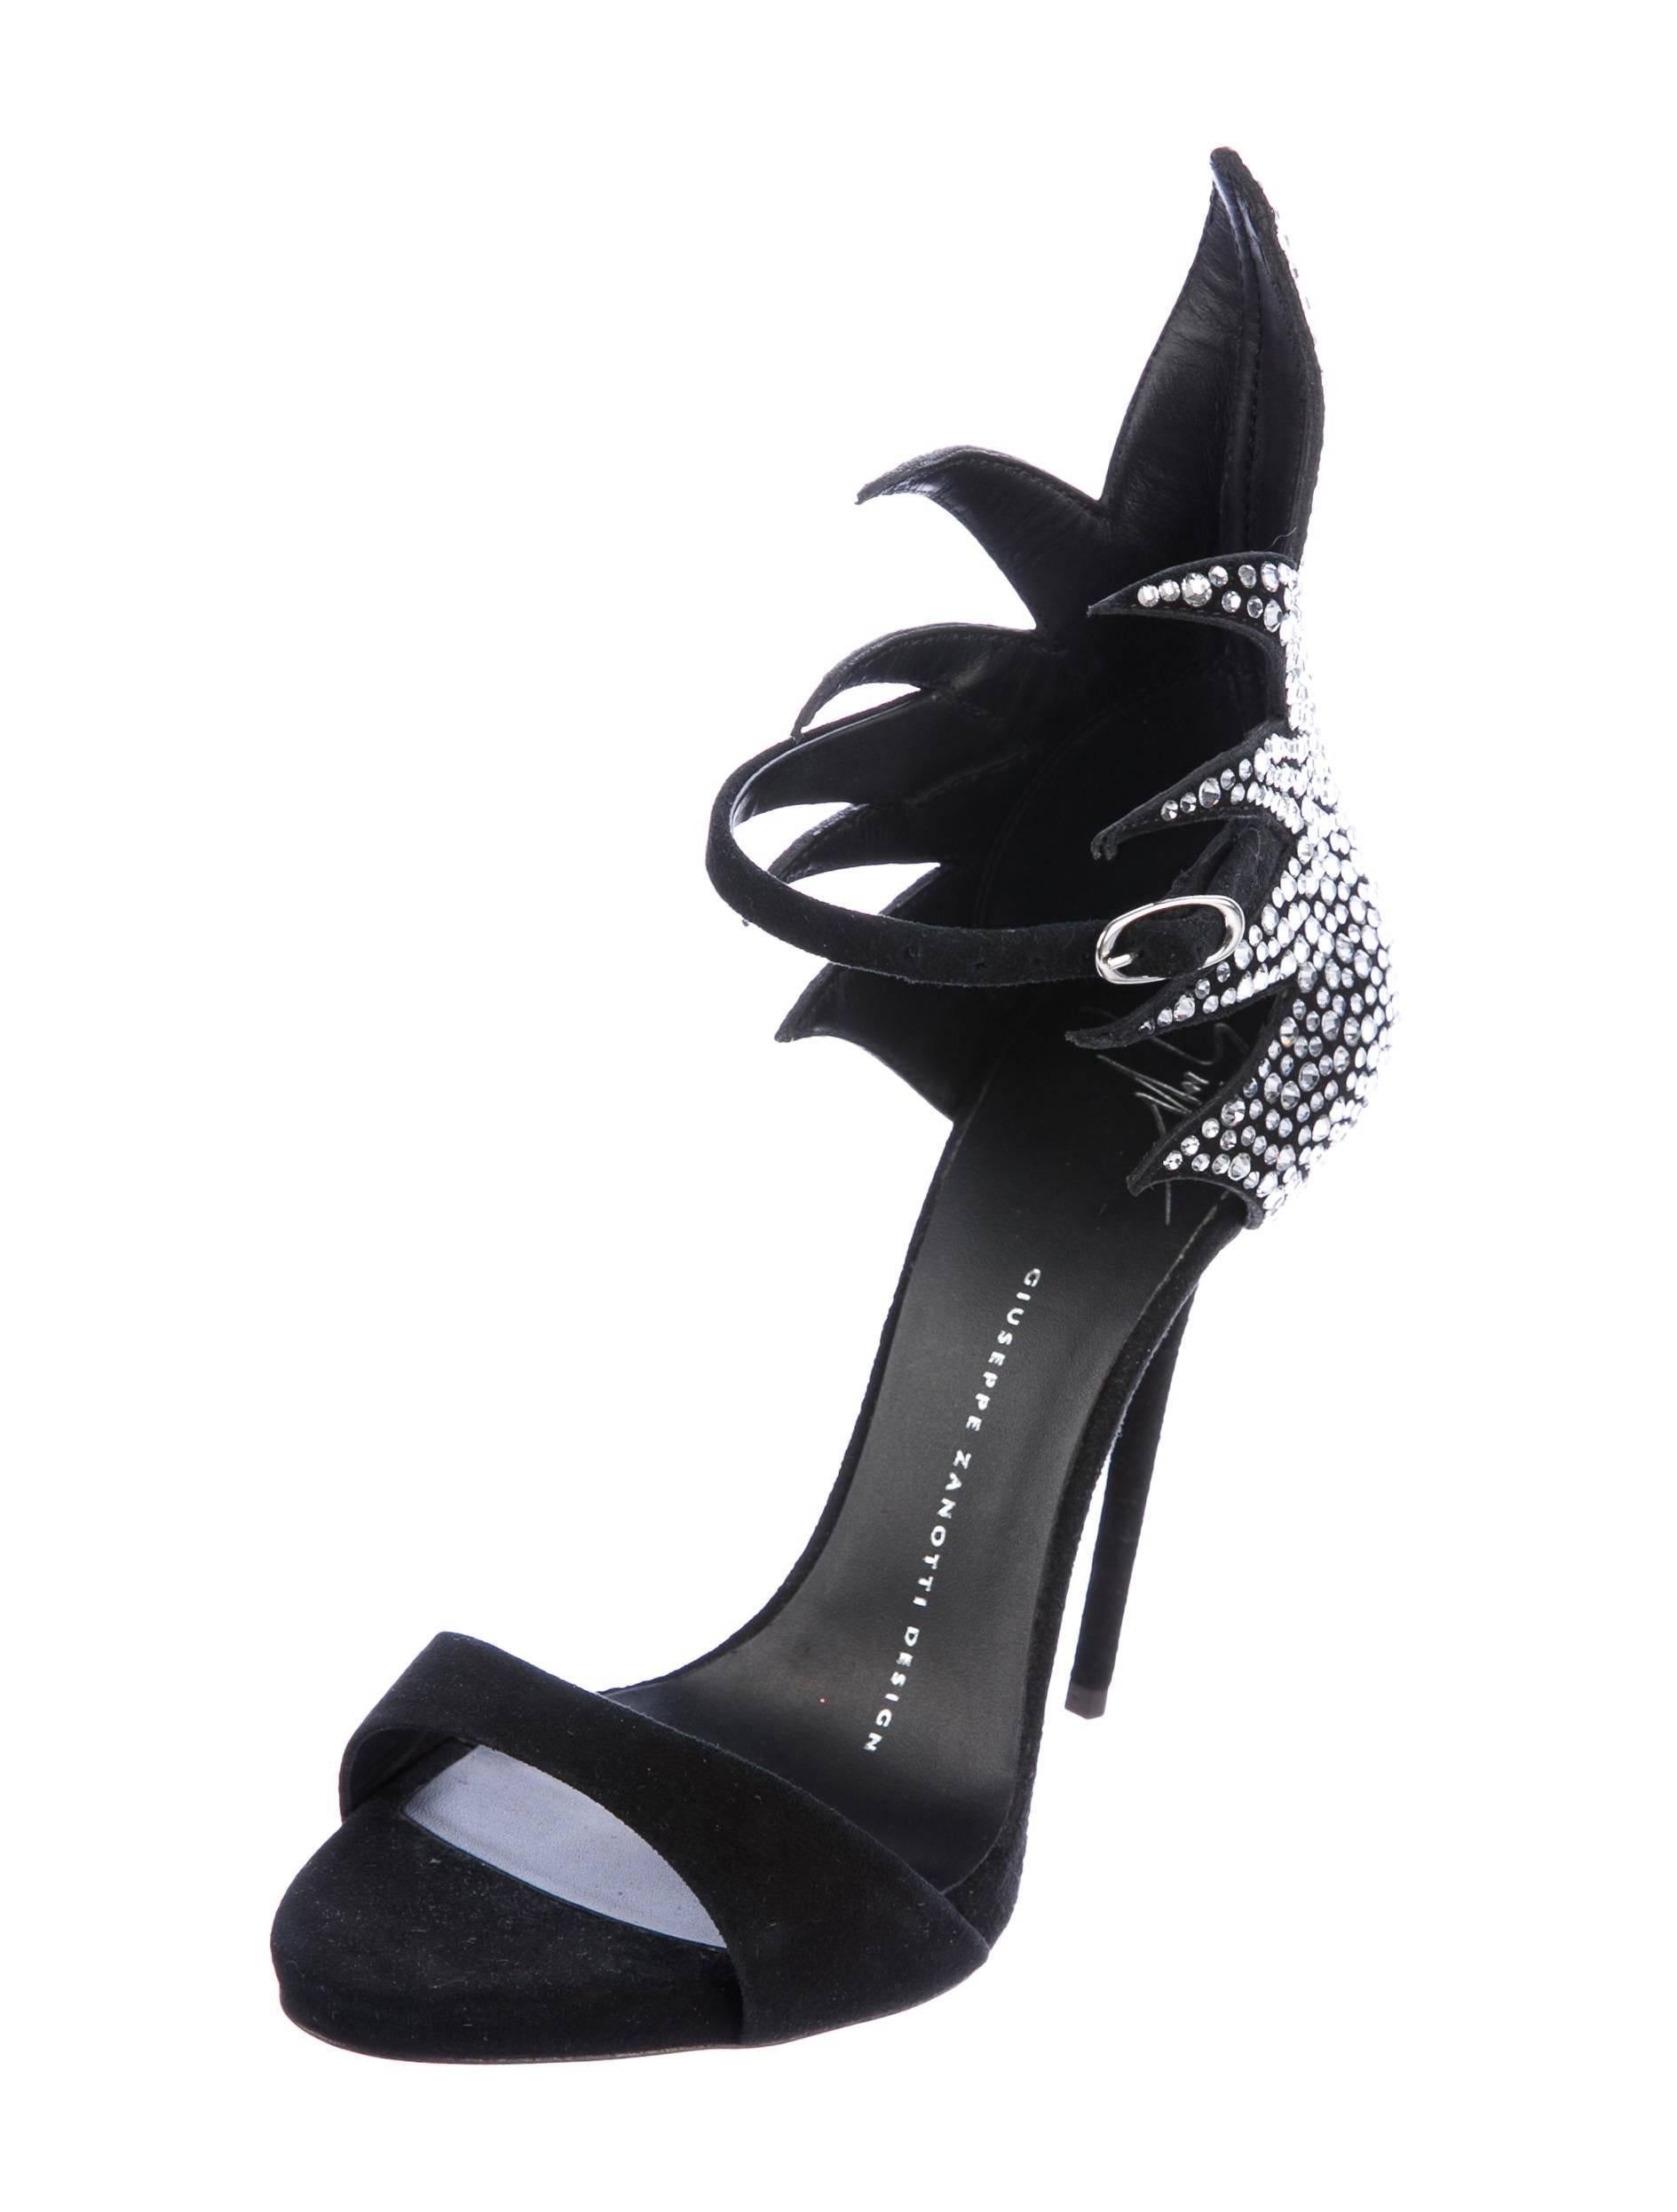 Giuseppe Zanotti New Black Suede Crystal Back Evening Sandals Heels in Box

Size IT 36
Suede
Crystal
Ankle buckle closure
Made in Italy
Heel height 4.75" (120mm)
Includes original Giuseppe Zanotti box